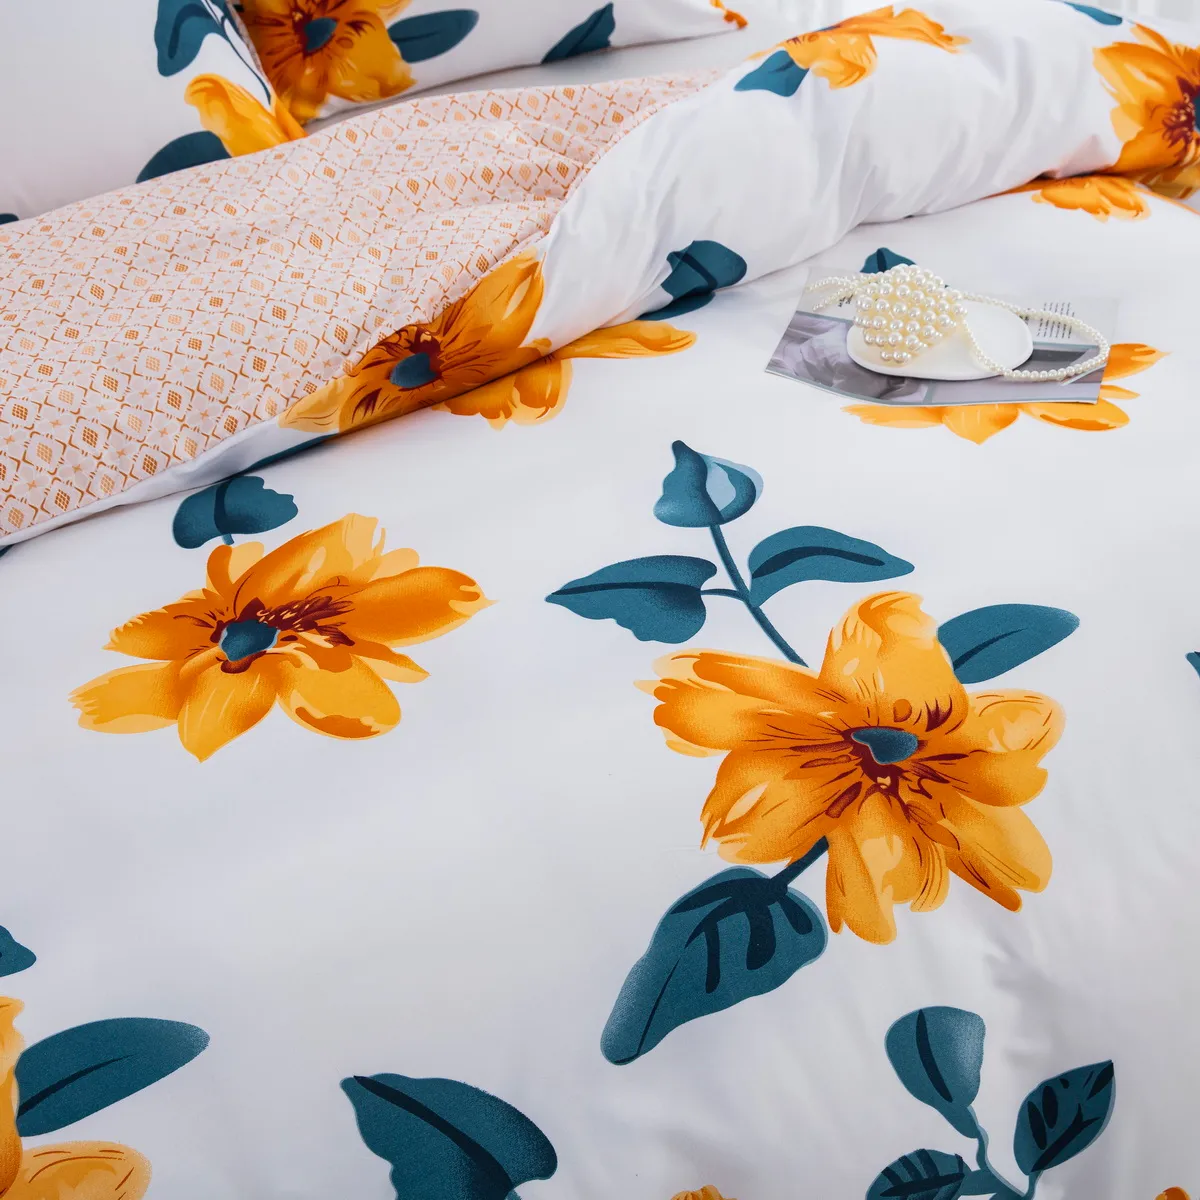 2/3pcs Soft and Comfortable Jacquard Daisy Design Bedding Set,Includes Duvet Cover and Pillowcases Multicolour-1 big image 1